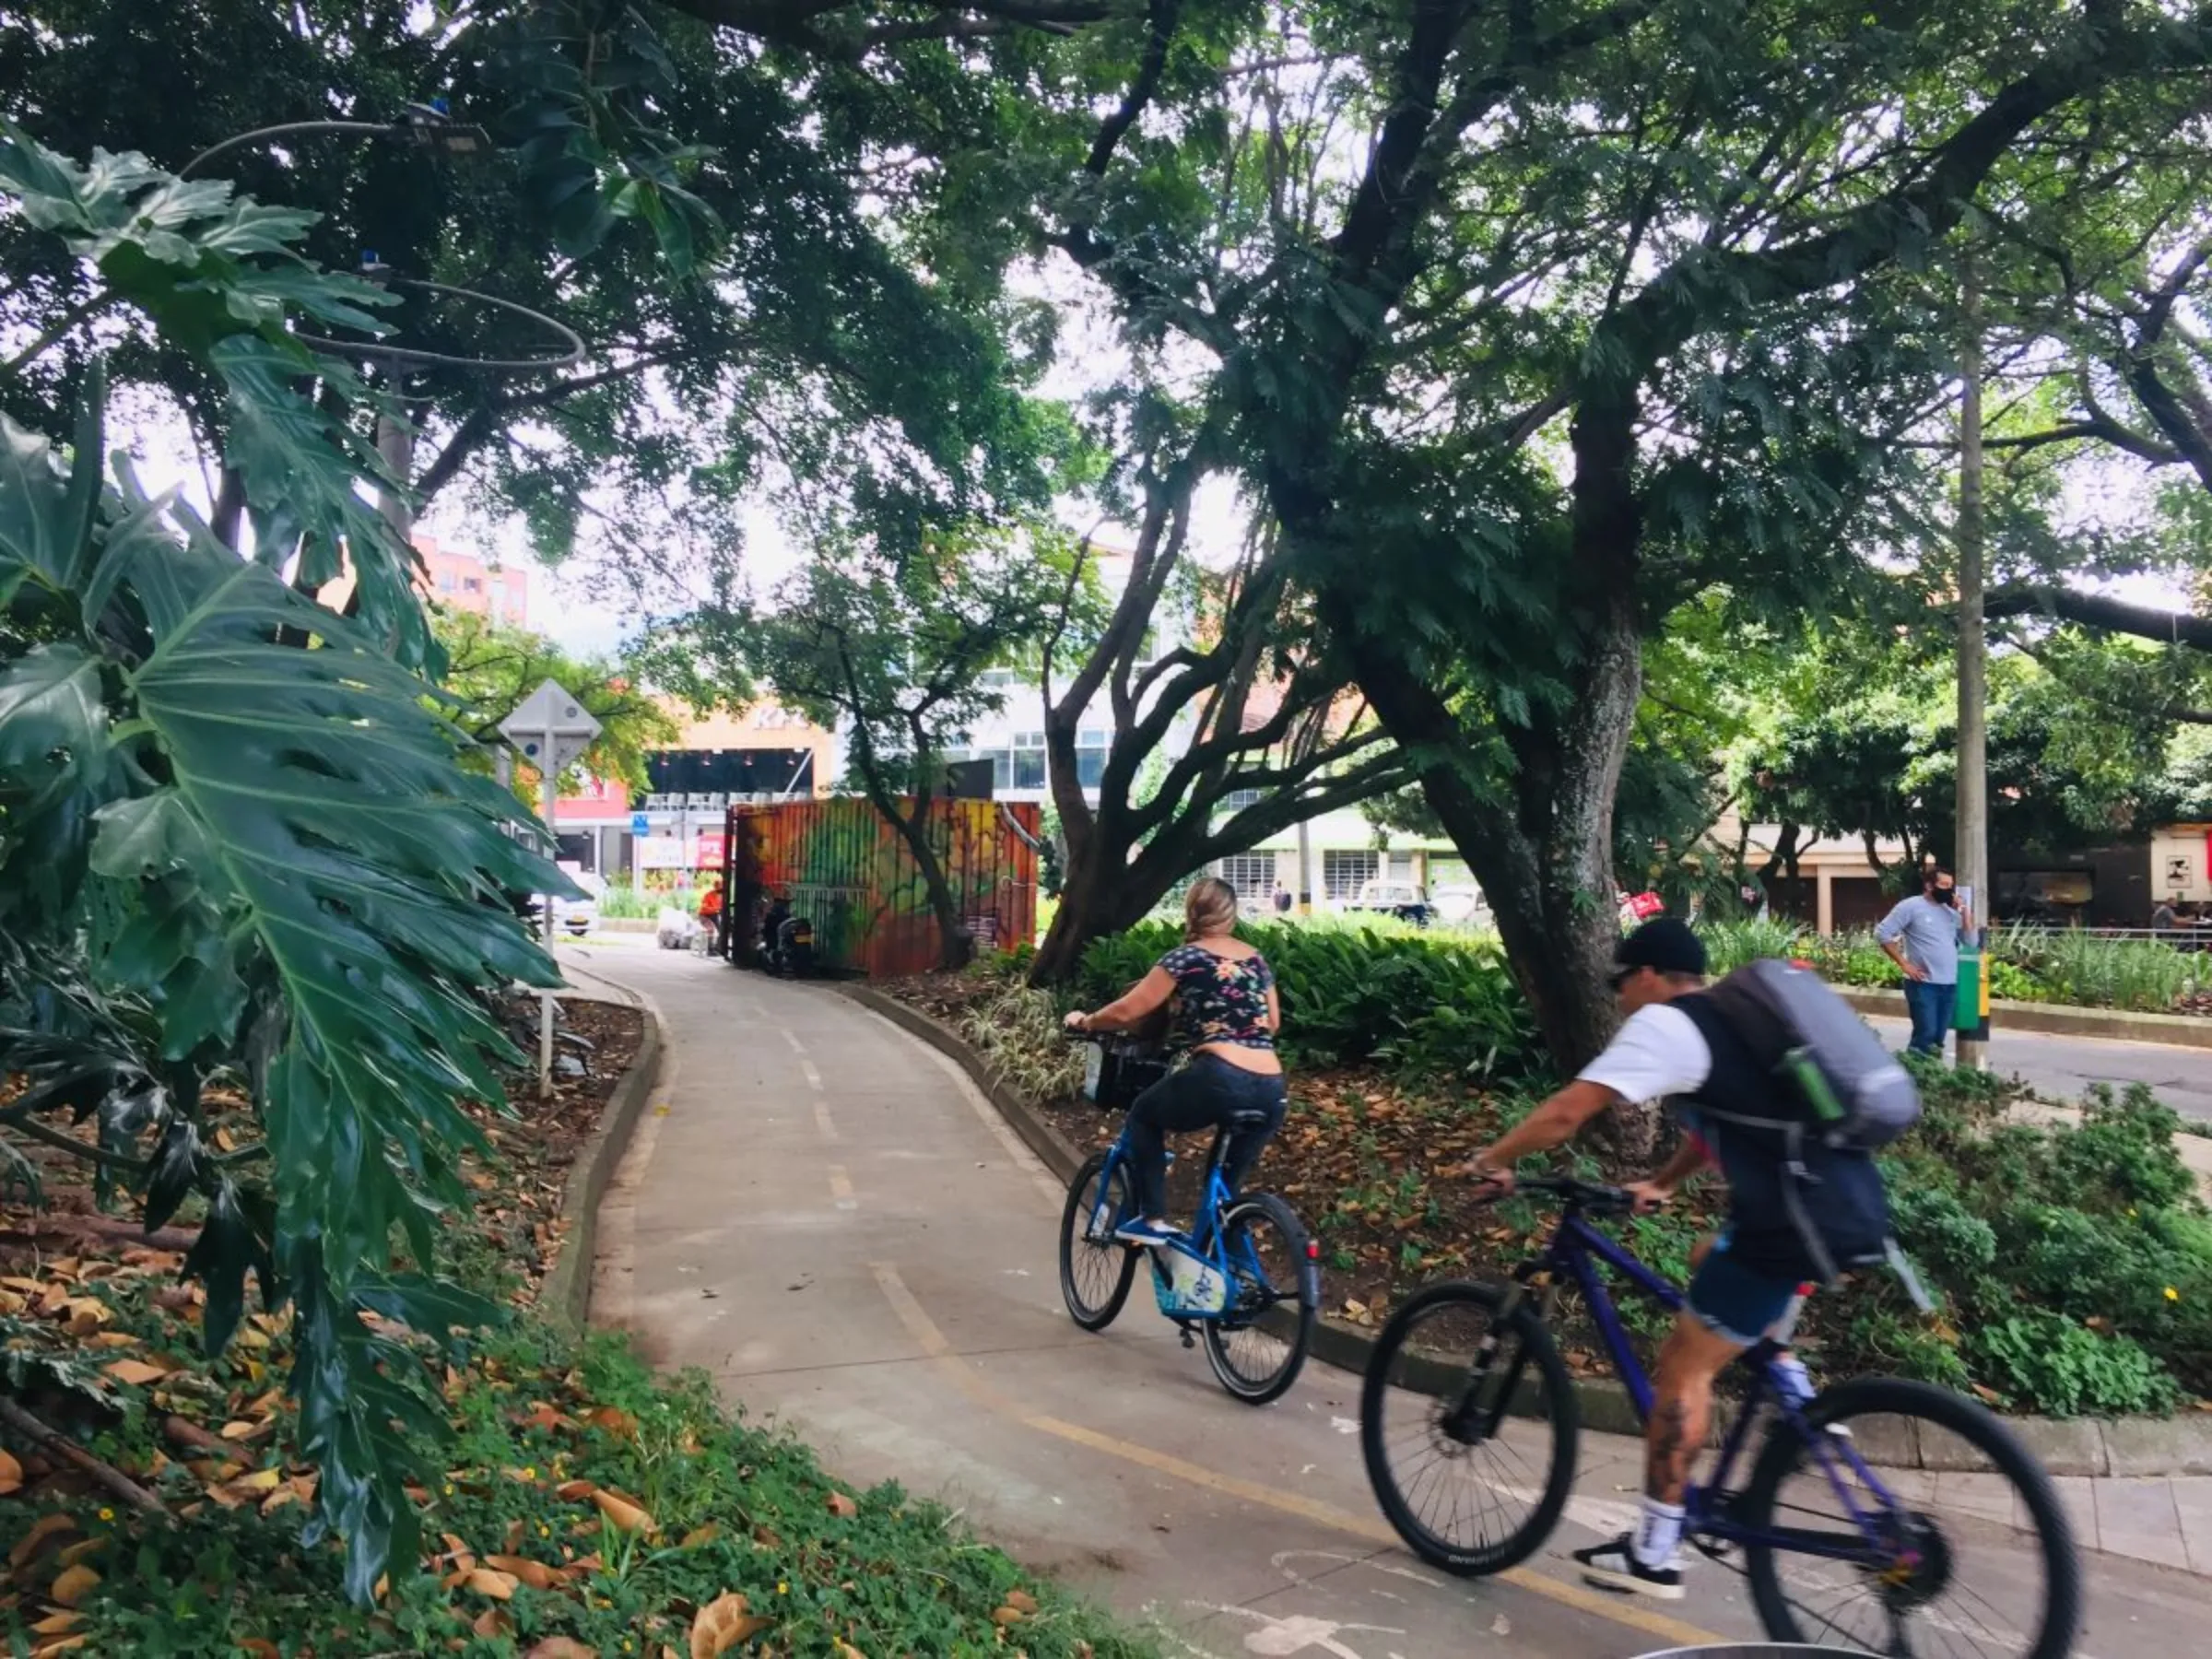 Cyclists along a tree-shaded pathway in Medellin, Colombia, July 16, 2021. Thomson Reuters Foundation/ Anastasia Moloney